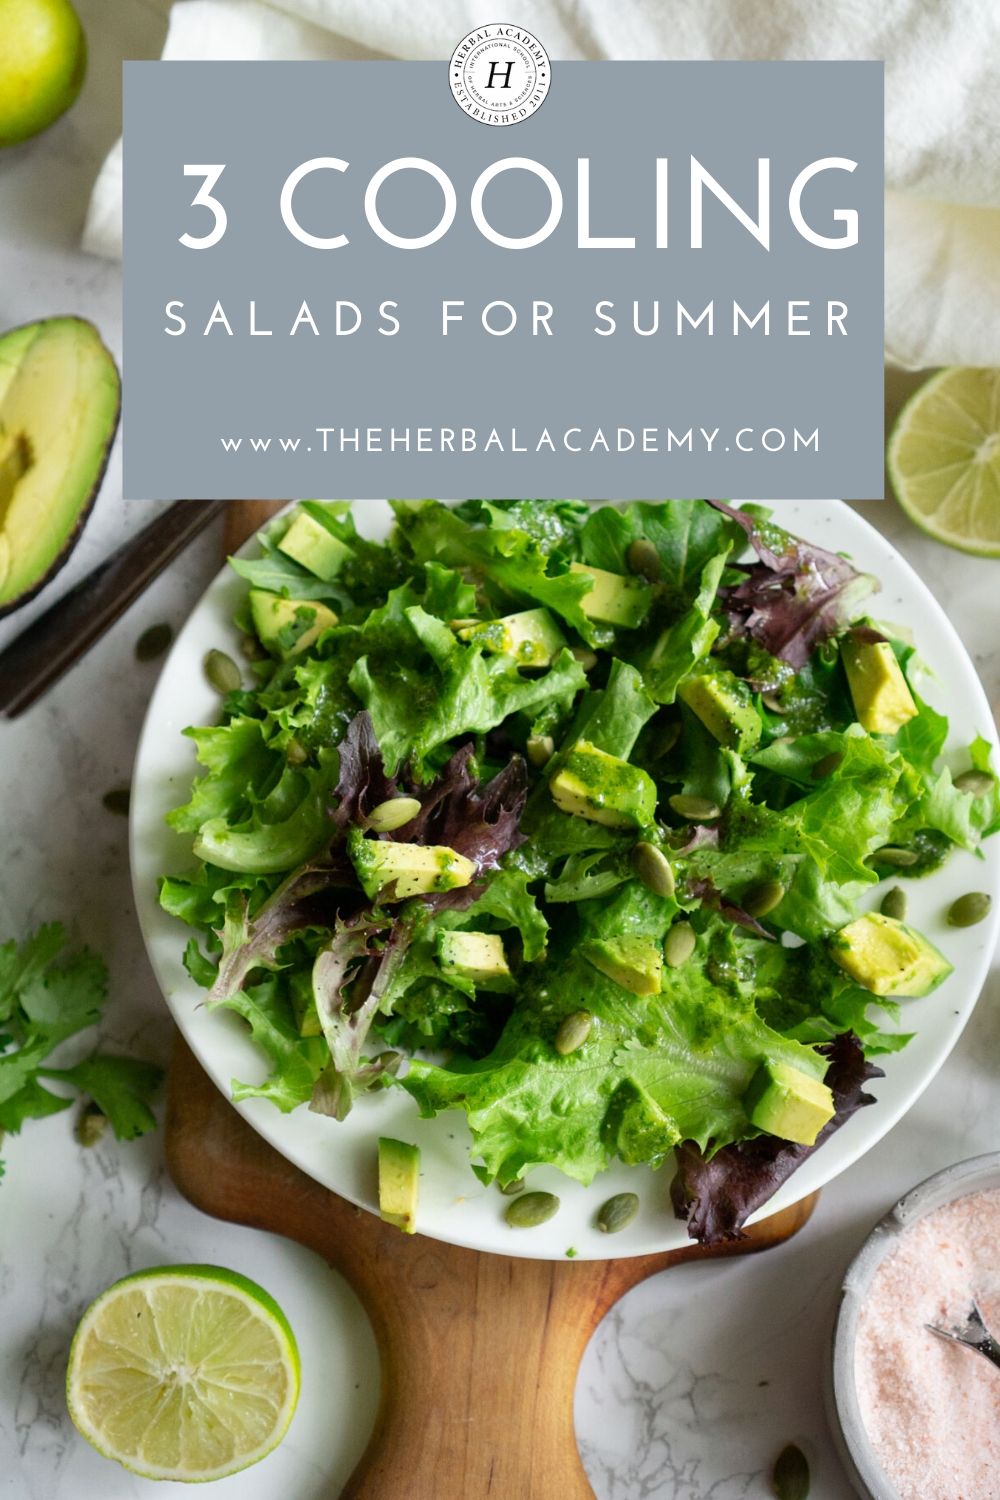 3 Cooling Salads for Summer | Herbal Academy | Don't miss these three cooling salad recipes for summer—all kitchen and taste-bud tested by Ayurvedic practitioner and post author, Greta Kent-Stoll. 